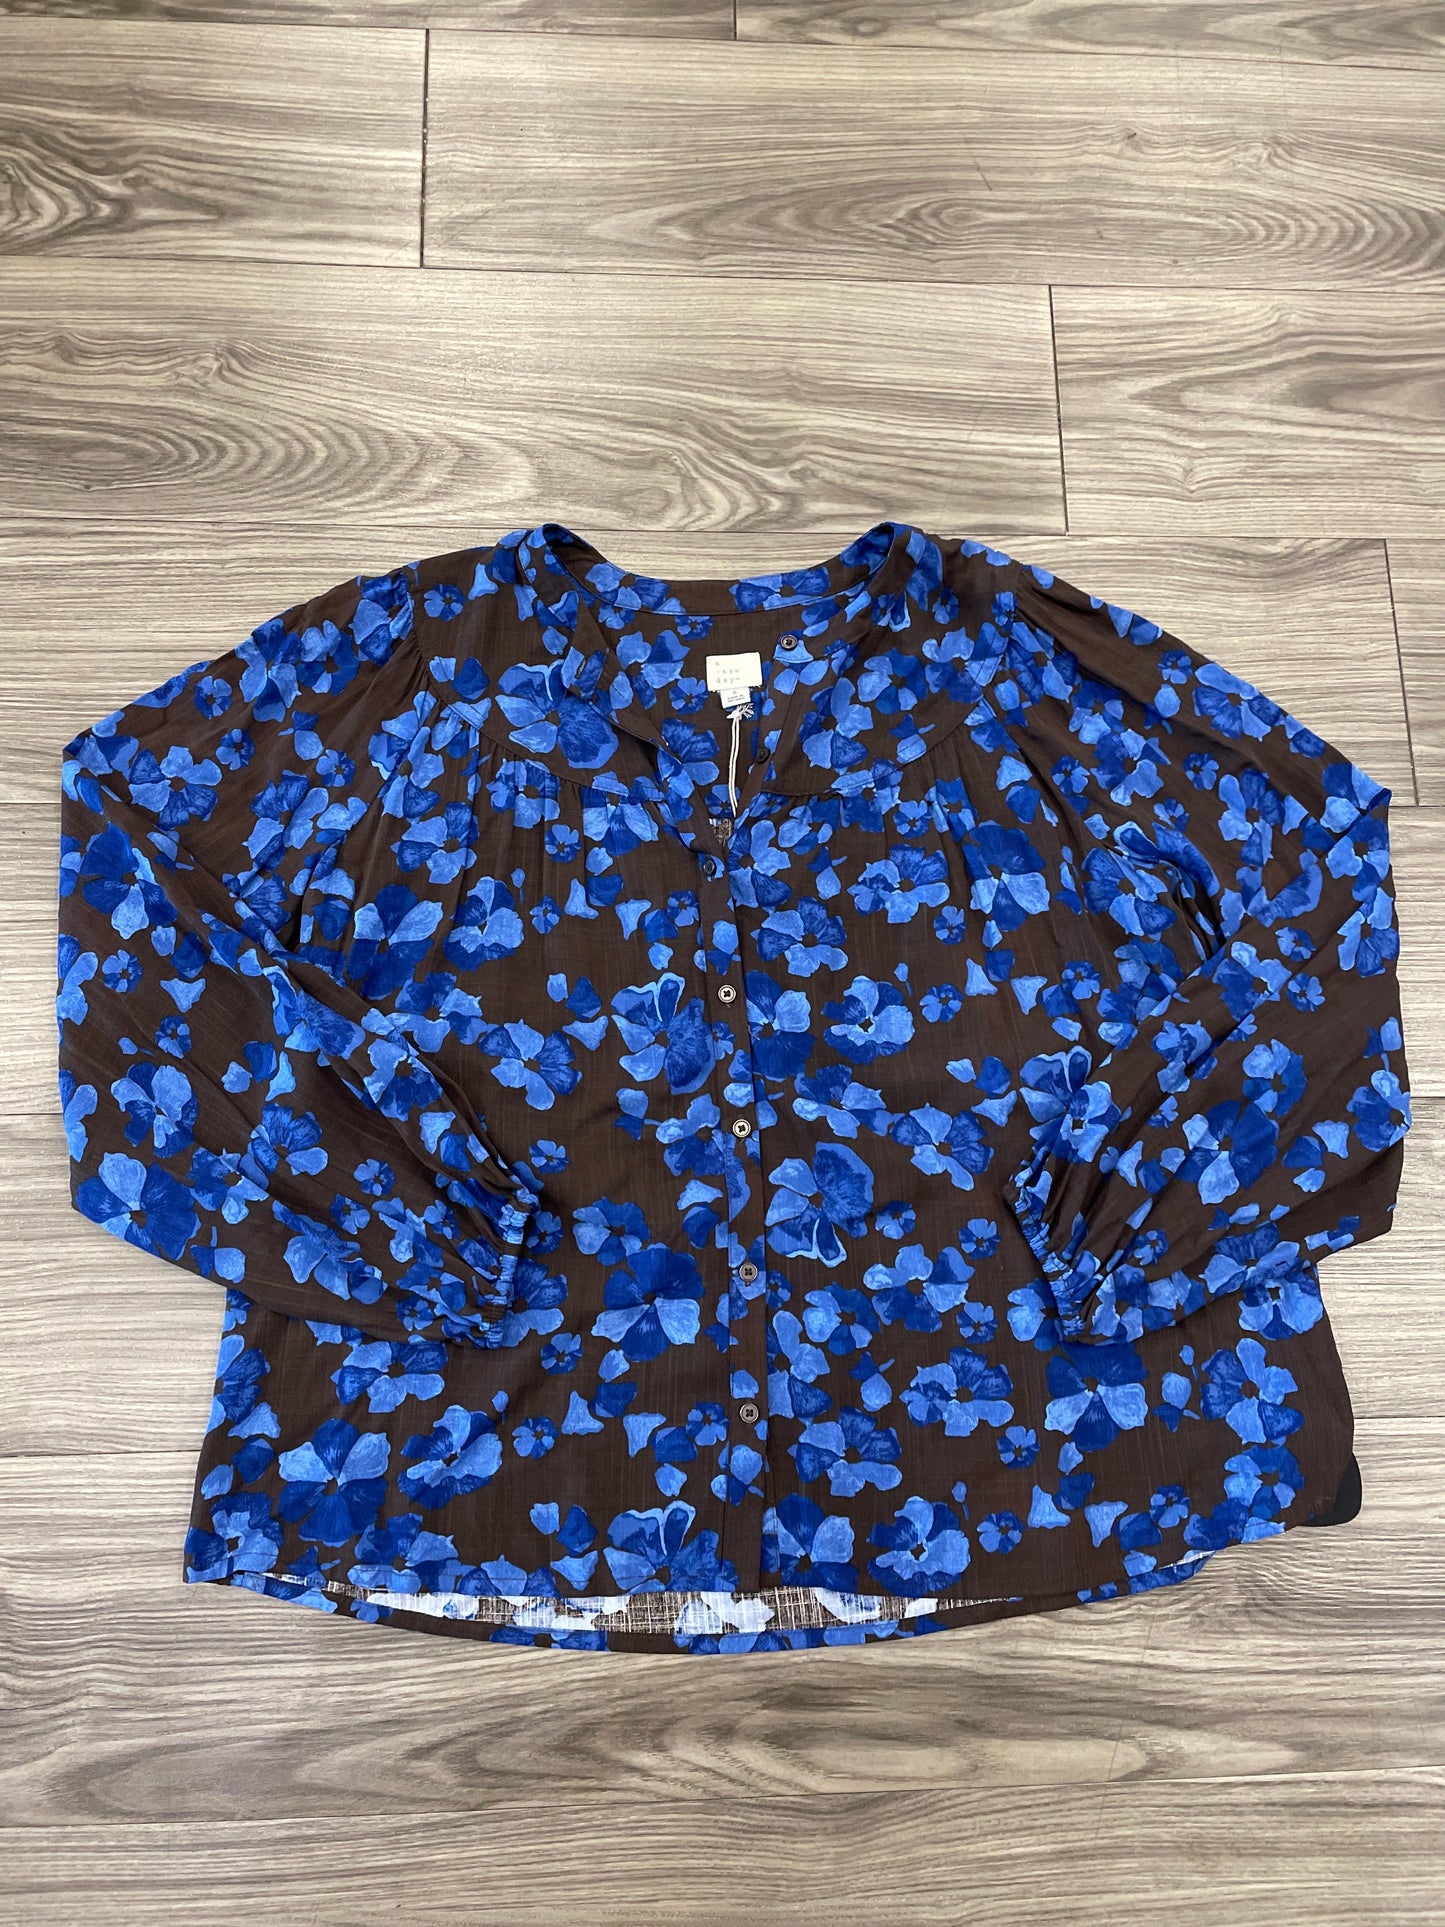 Blue Top Long Sleeve A New Day, Size S